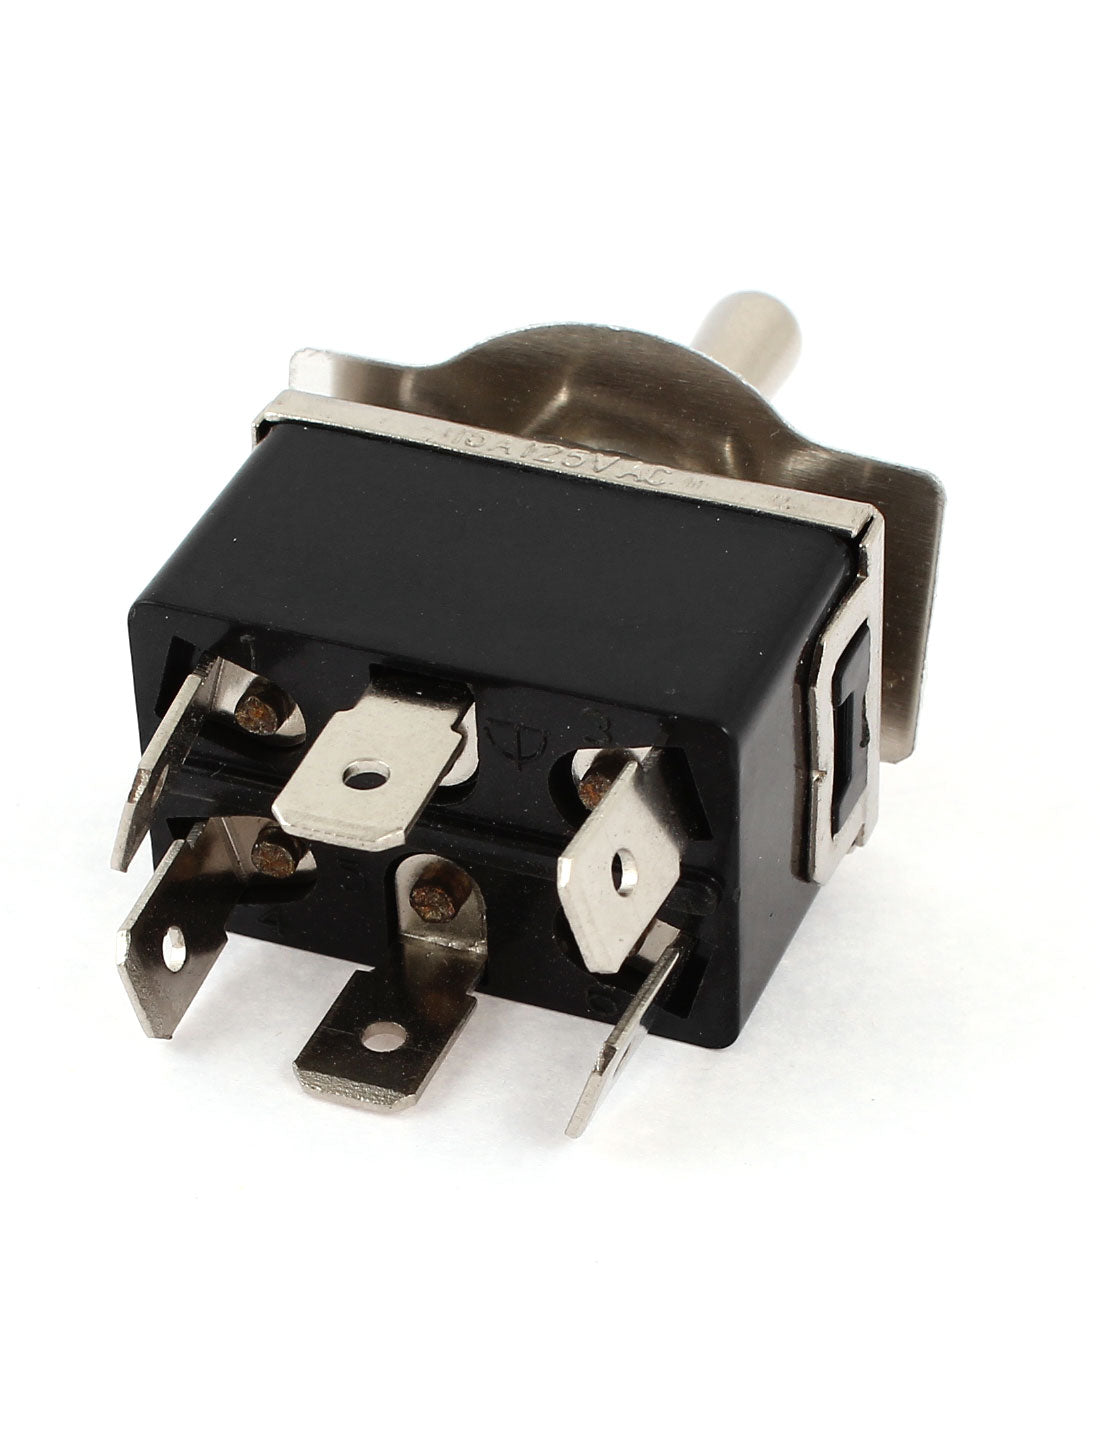 uxcell Uxcell Vehicle Black 6 Pin 3 Position Momentary On/Always Off/Momentary On DPDT Toggle Switch 125V 15A